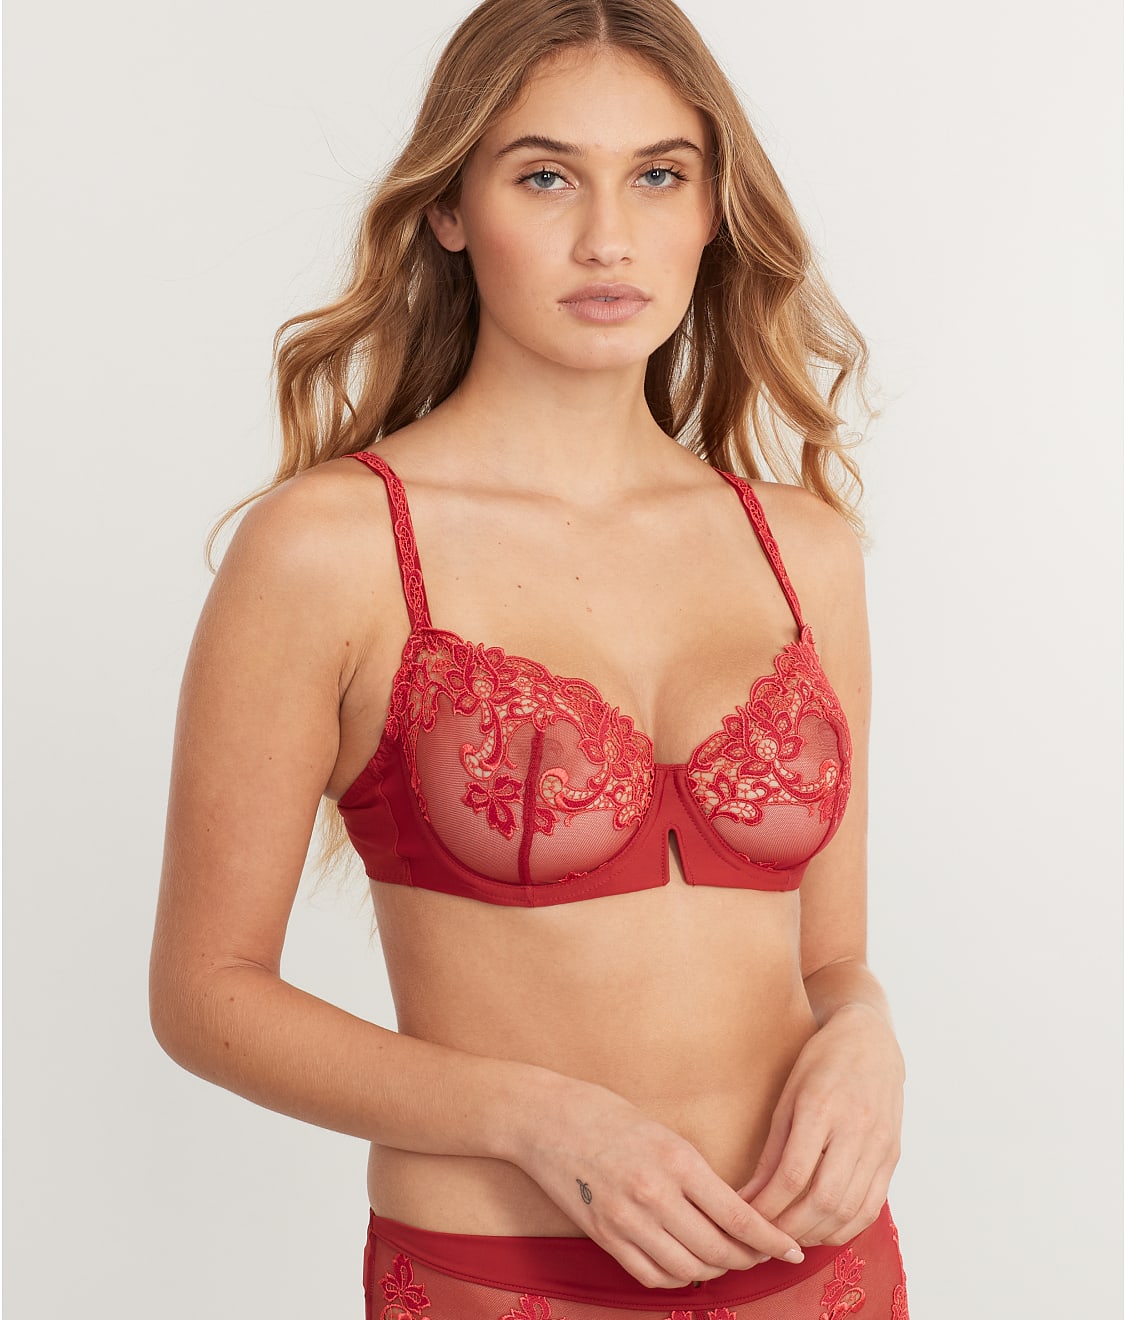 contrasting large old fashioned type bra with small sexy bra Stock